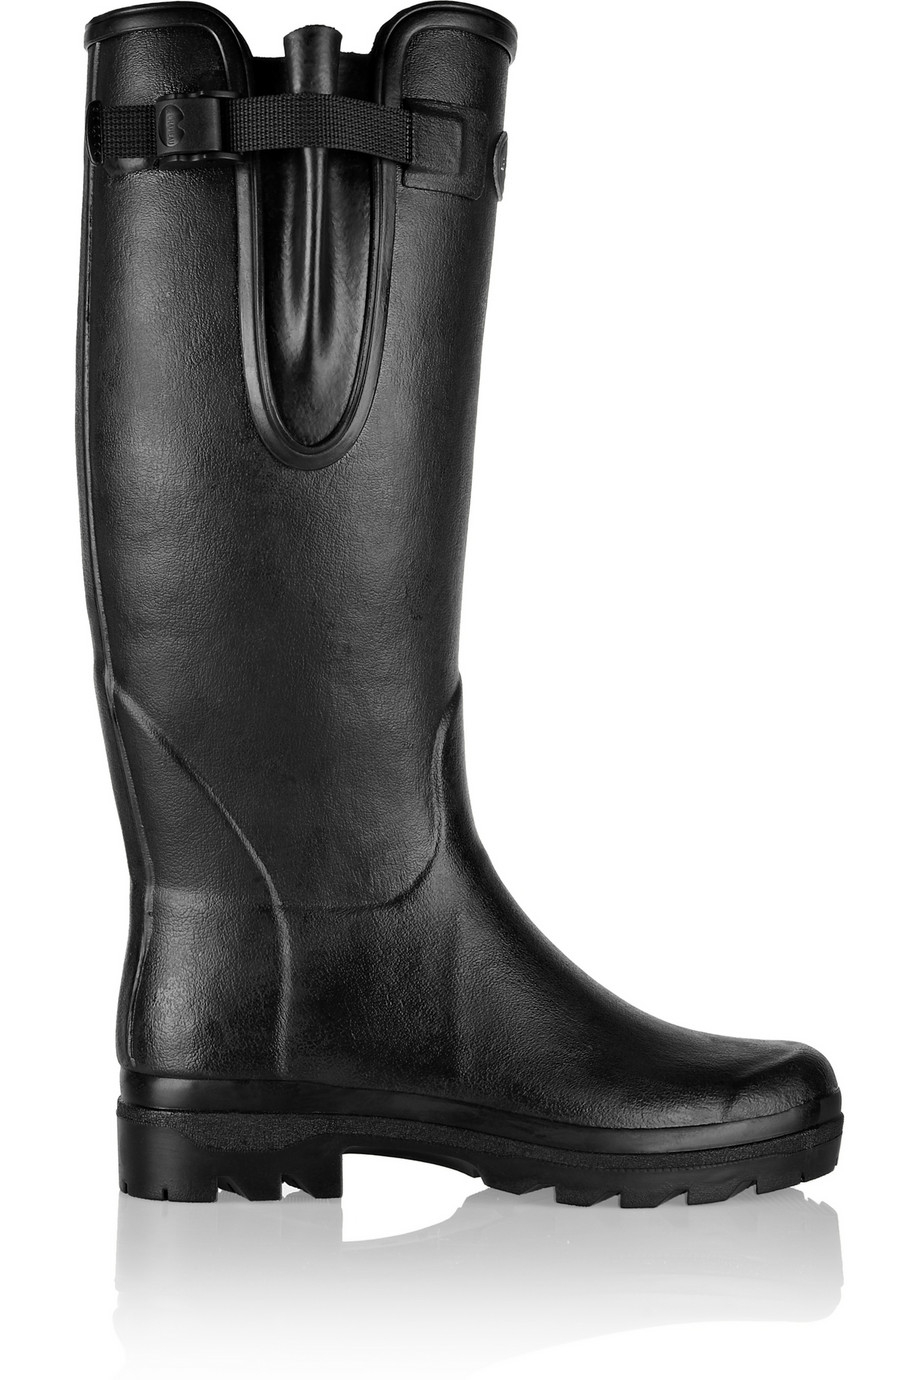 Lyst - Le Chameau Vierzon Leatherlined Rubber Boots in Black